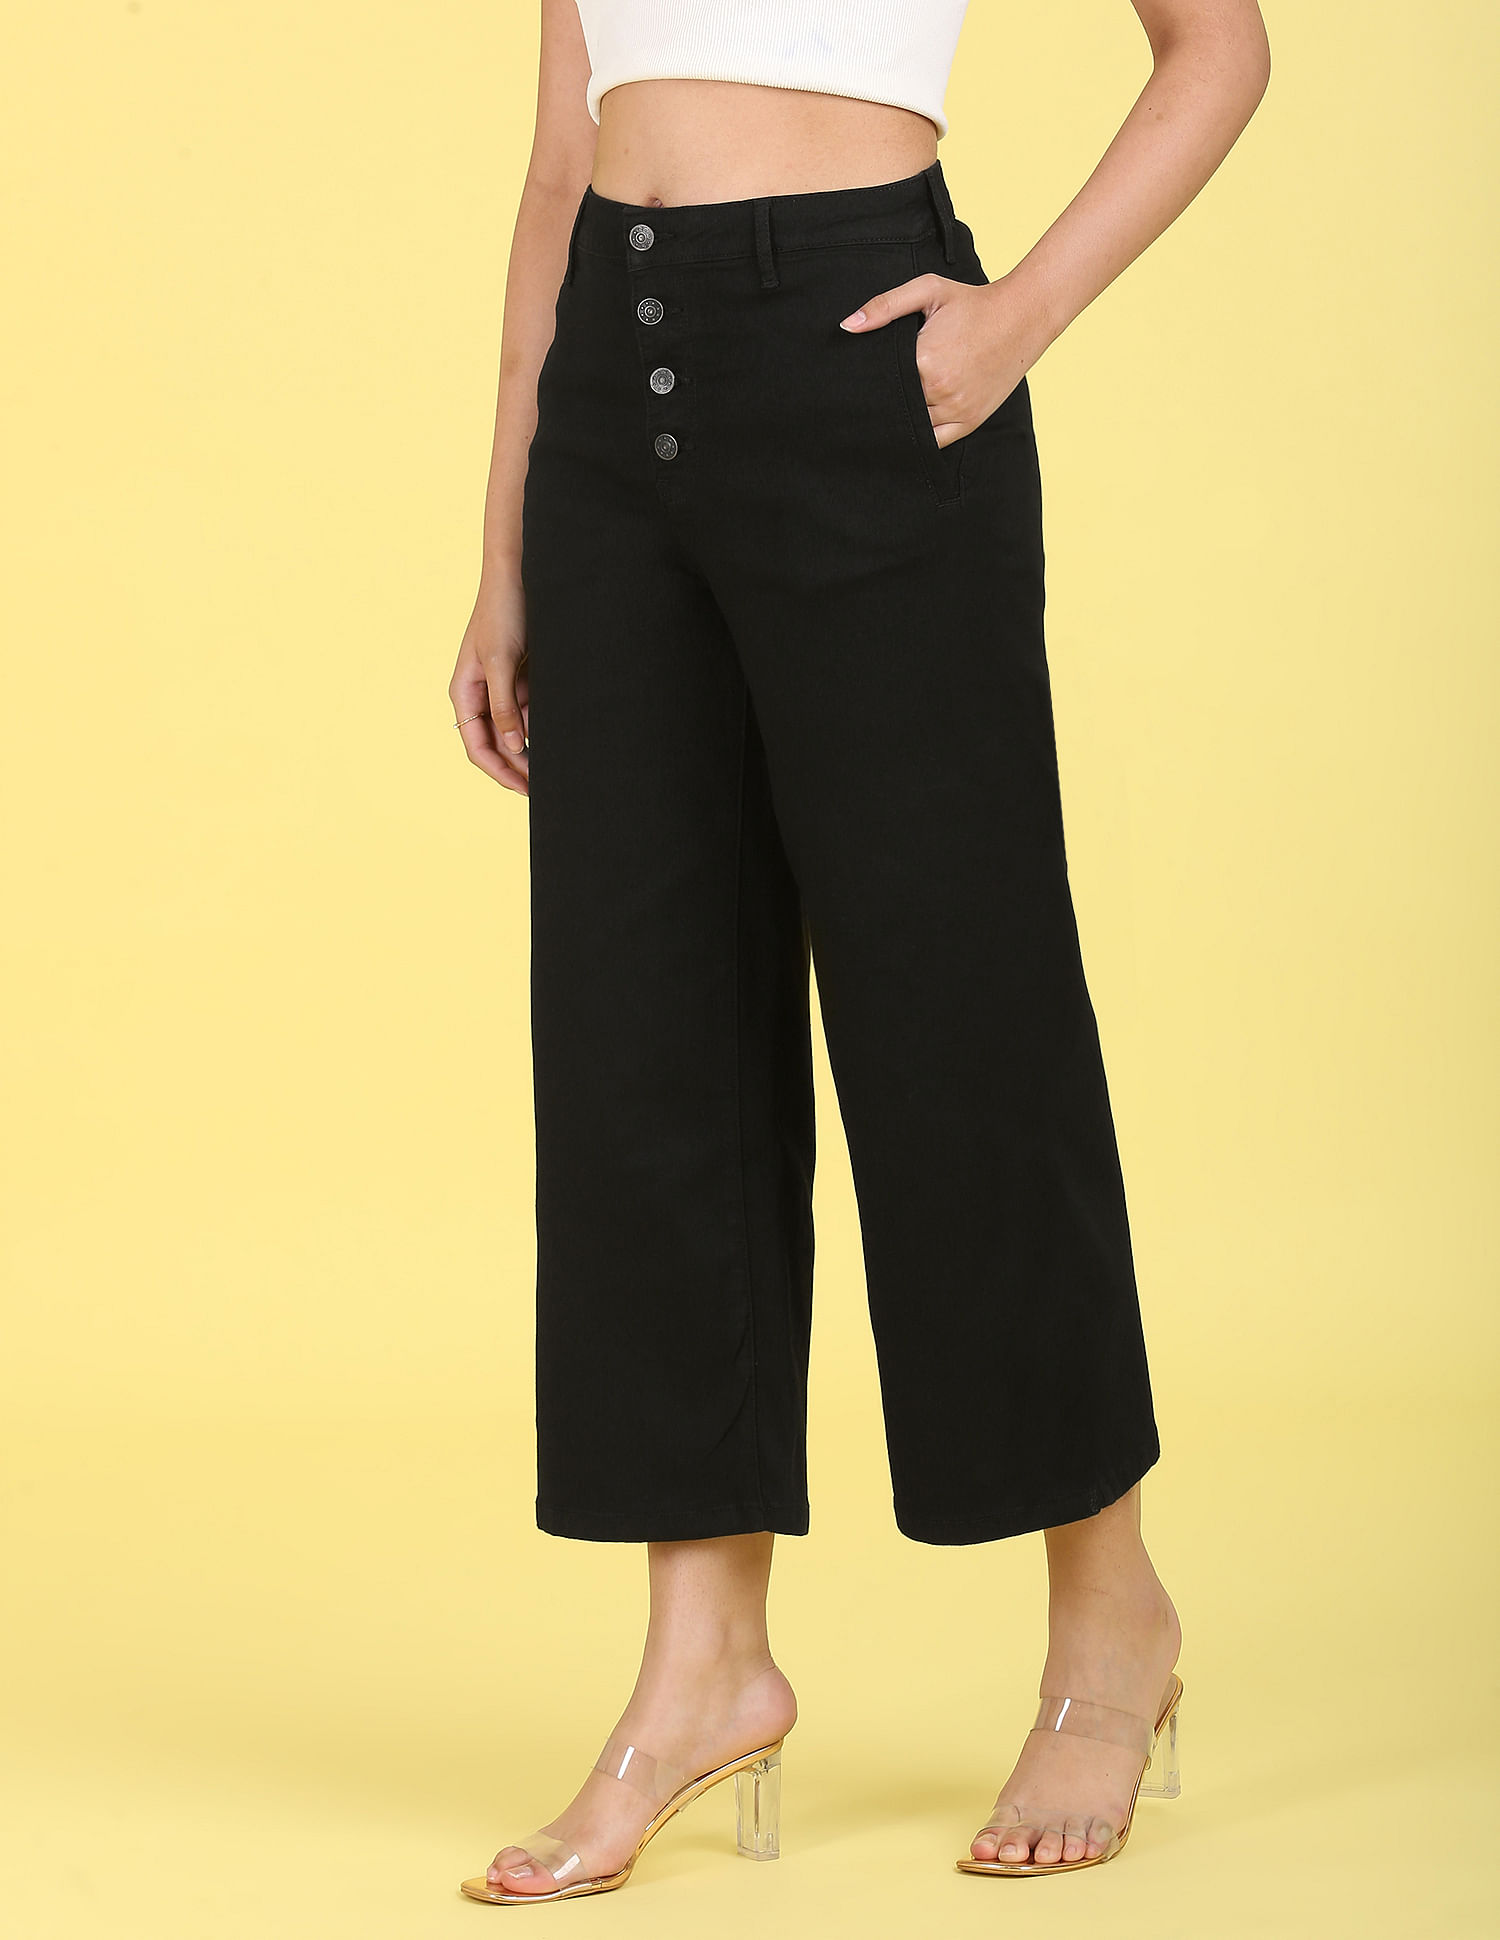 18 Flattering High-Waisted Trousers That Aren't Paper Bag Waist Pants |  HuffPost Life